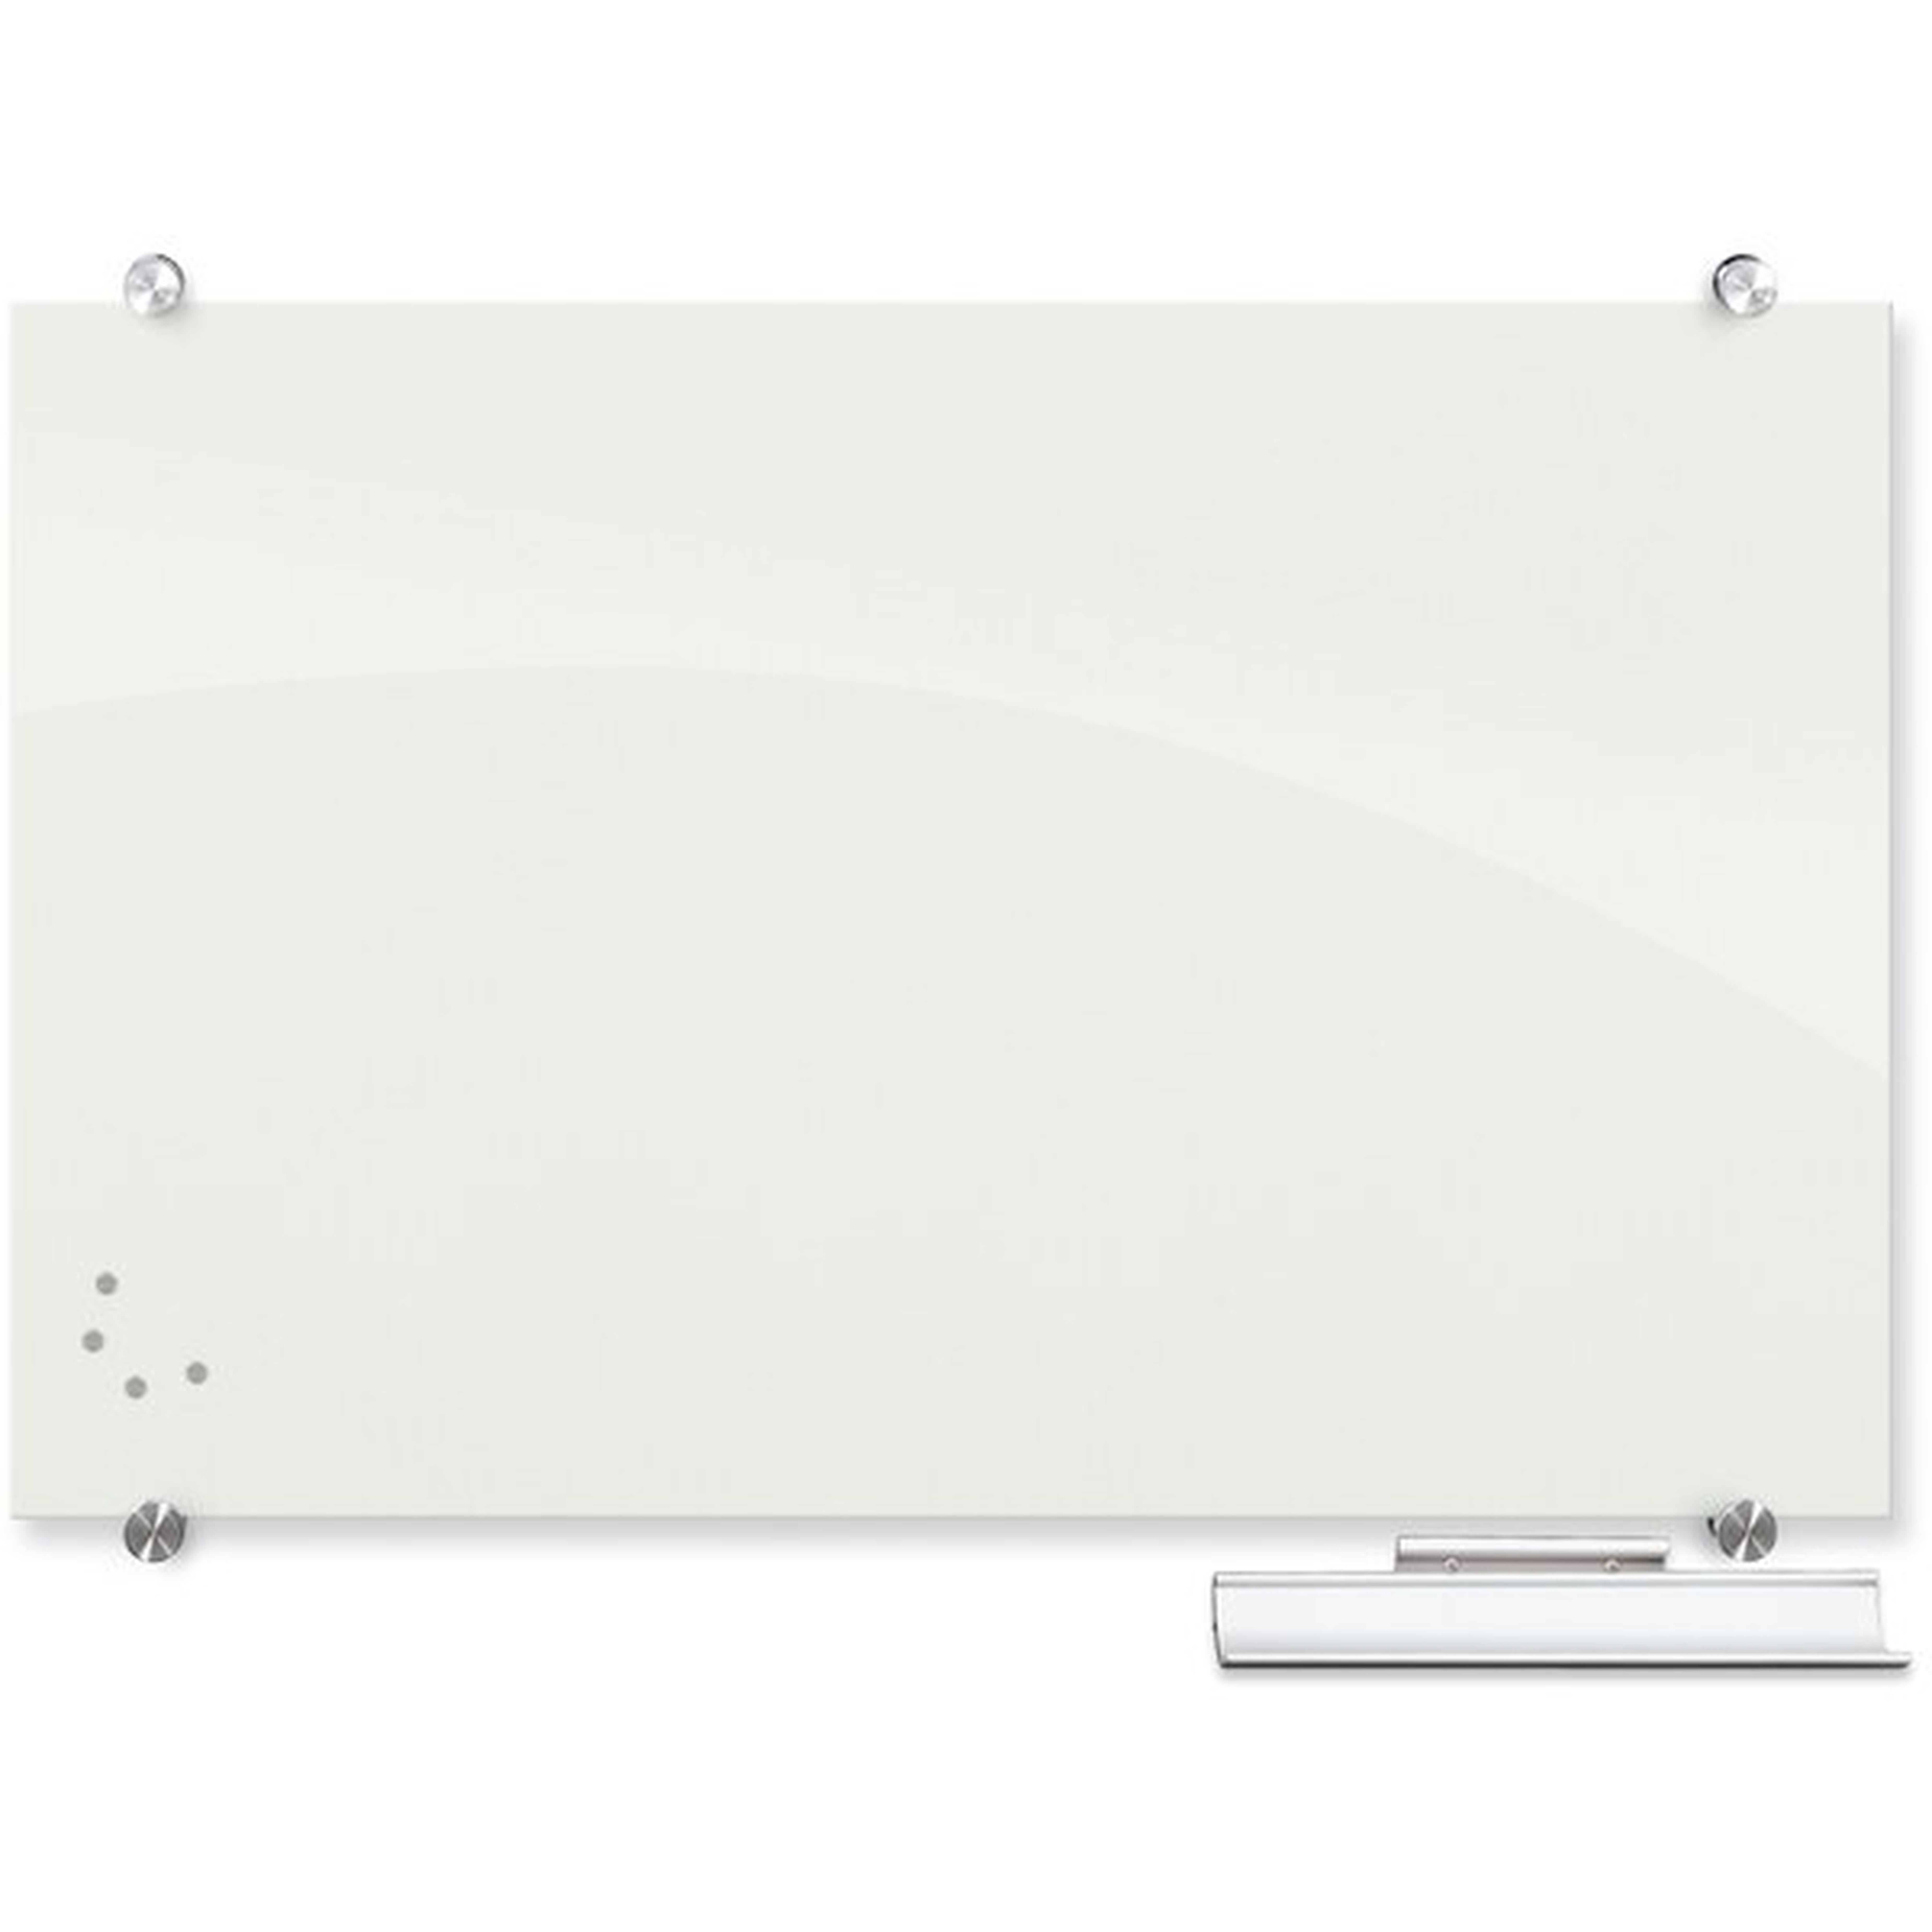 Visionary Magnetic Wall Mounted Glass Board - Wayfair